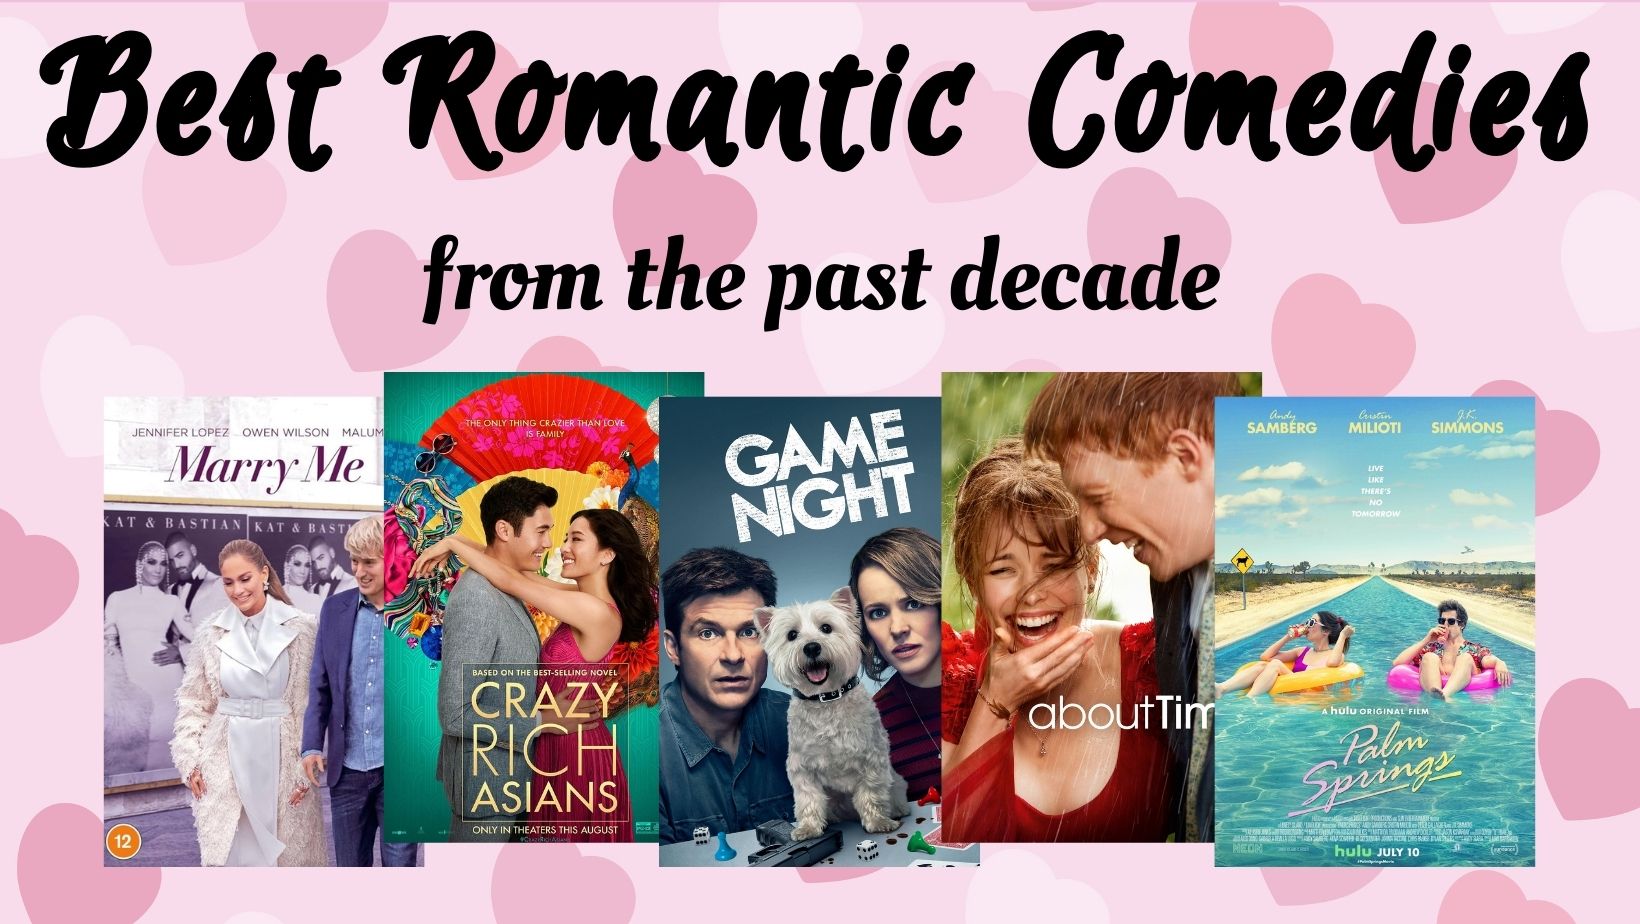 22 Modern Rom Coms: Best Romantic Comedies in the Last 10 Years